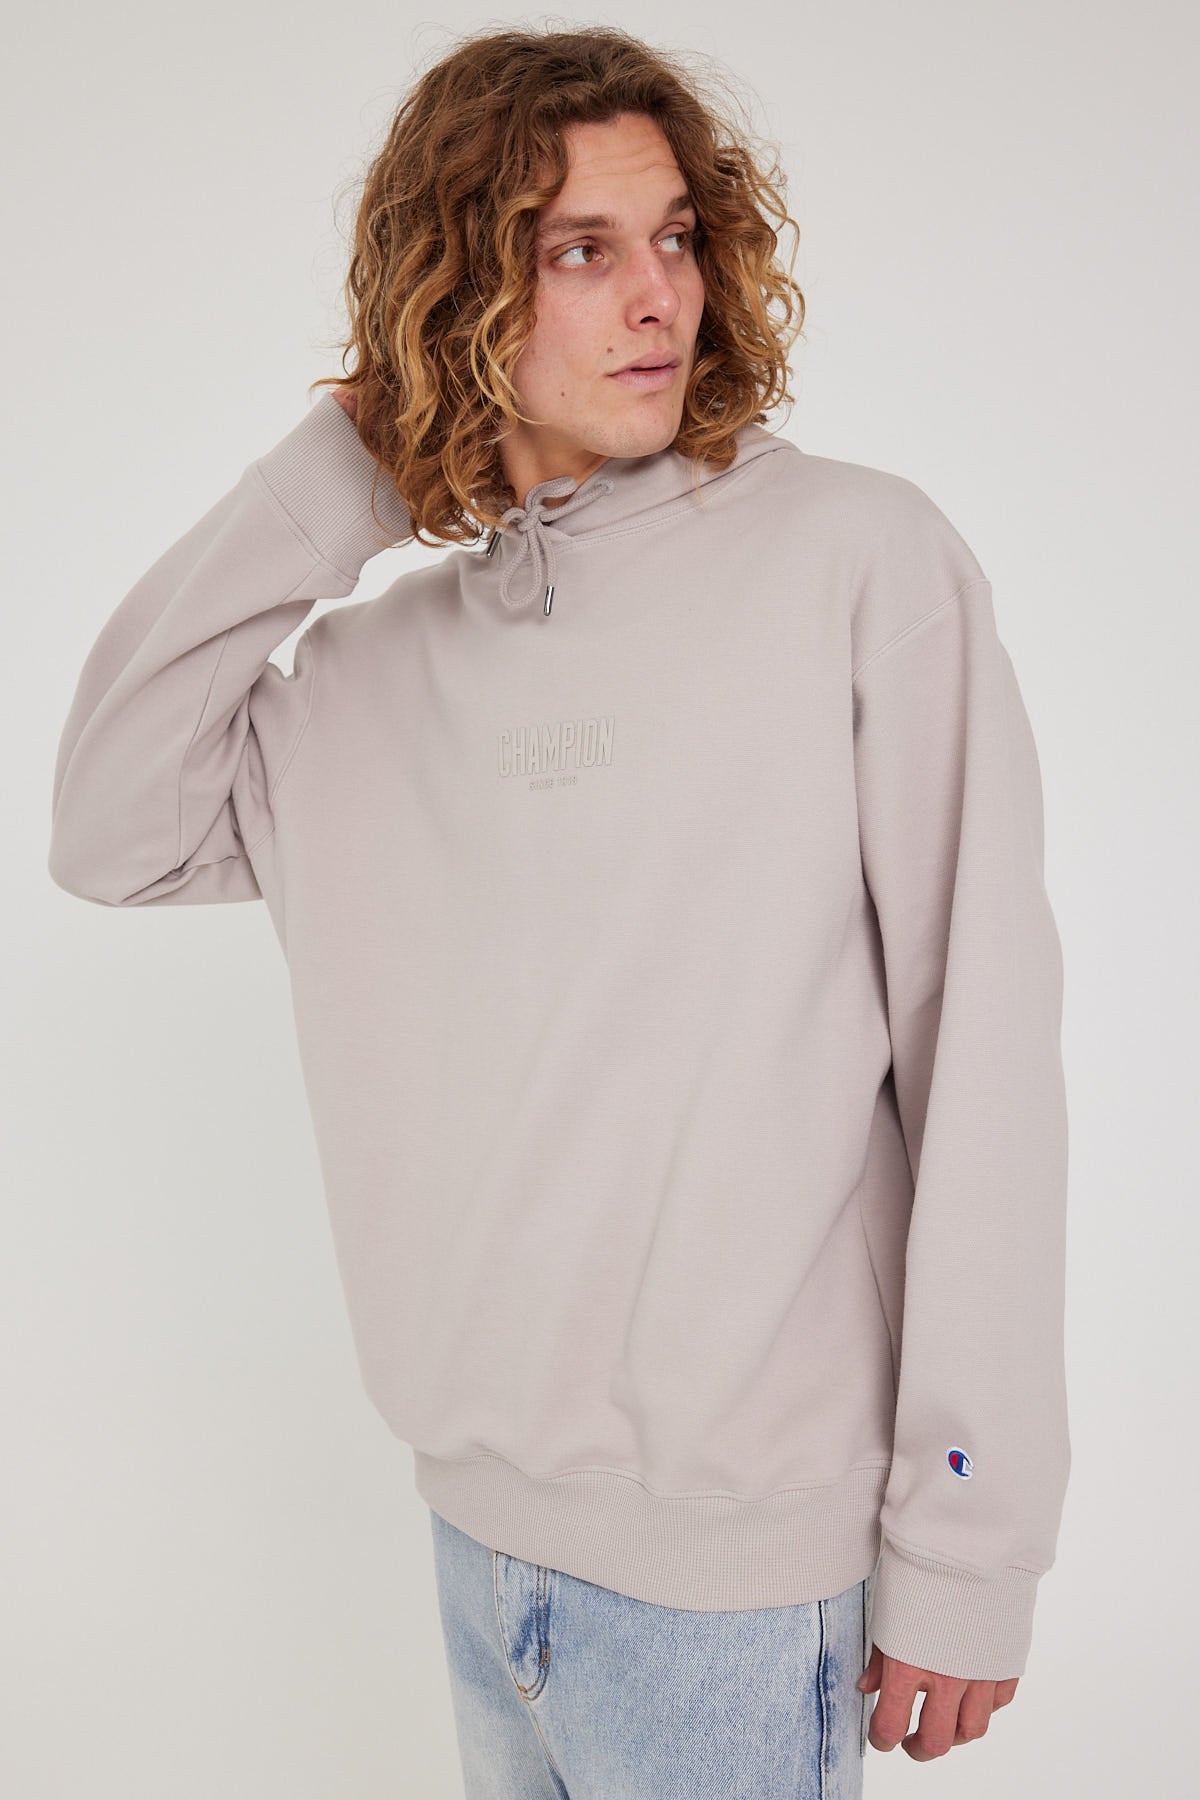 Champion Rochester Base Hoodie Pearl Oyster